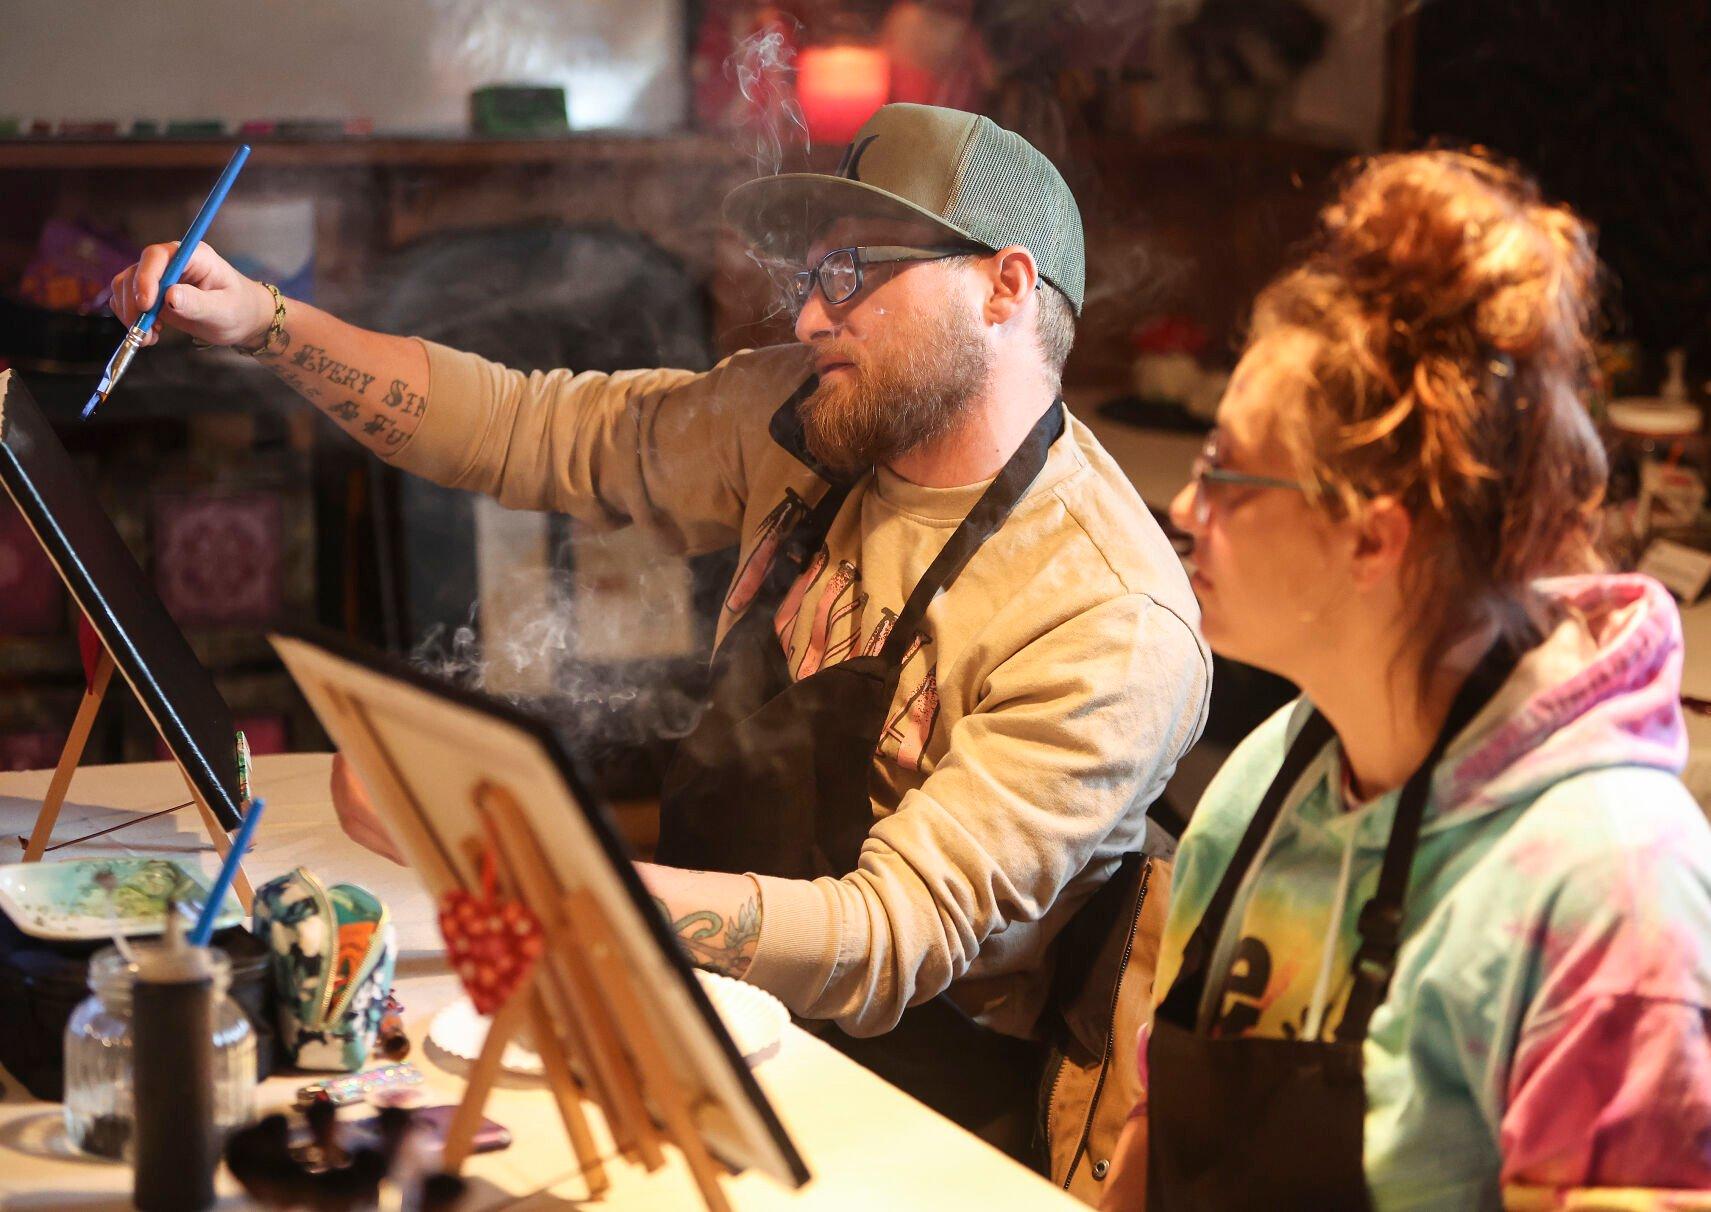 Eddie Klein (left) and Racheal Reynolds, both of Lancaster, Wis., take part in a painting class held at The Stoned Painter located in East Dubuque, Ill.    PHOTO CREDIT: Dave Kettering
Telegraph Herald